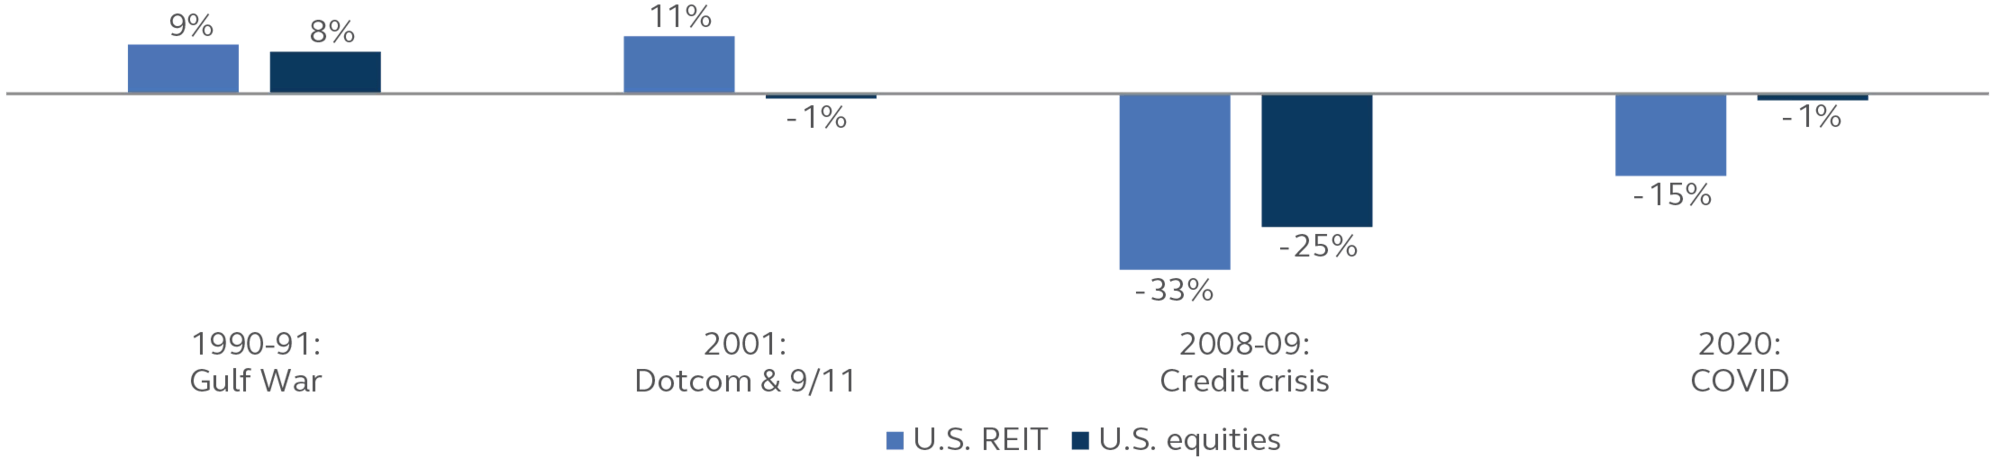 Bar chart showing average annualized returns of U.S. REITs and U.S. equities during different recessions